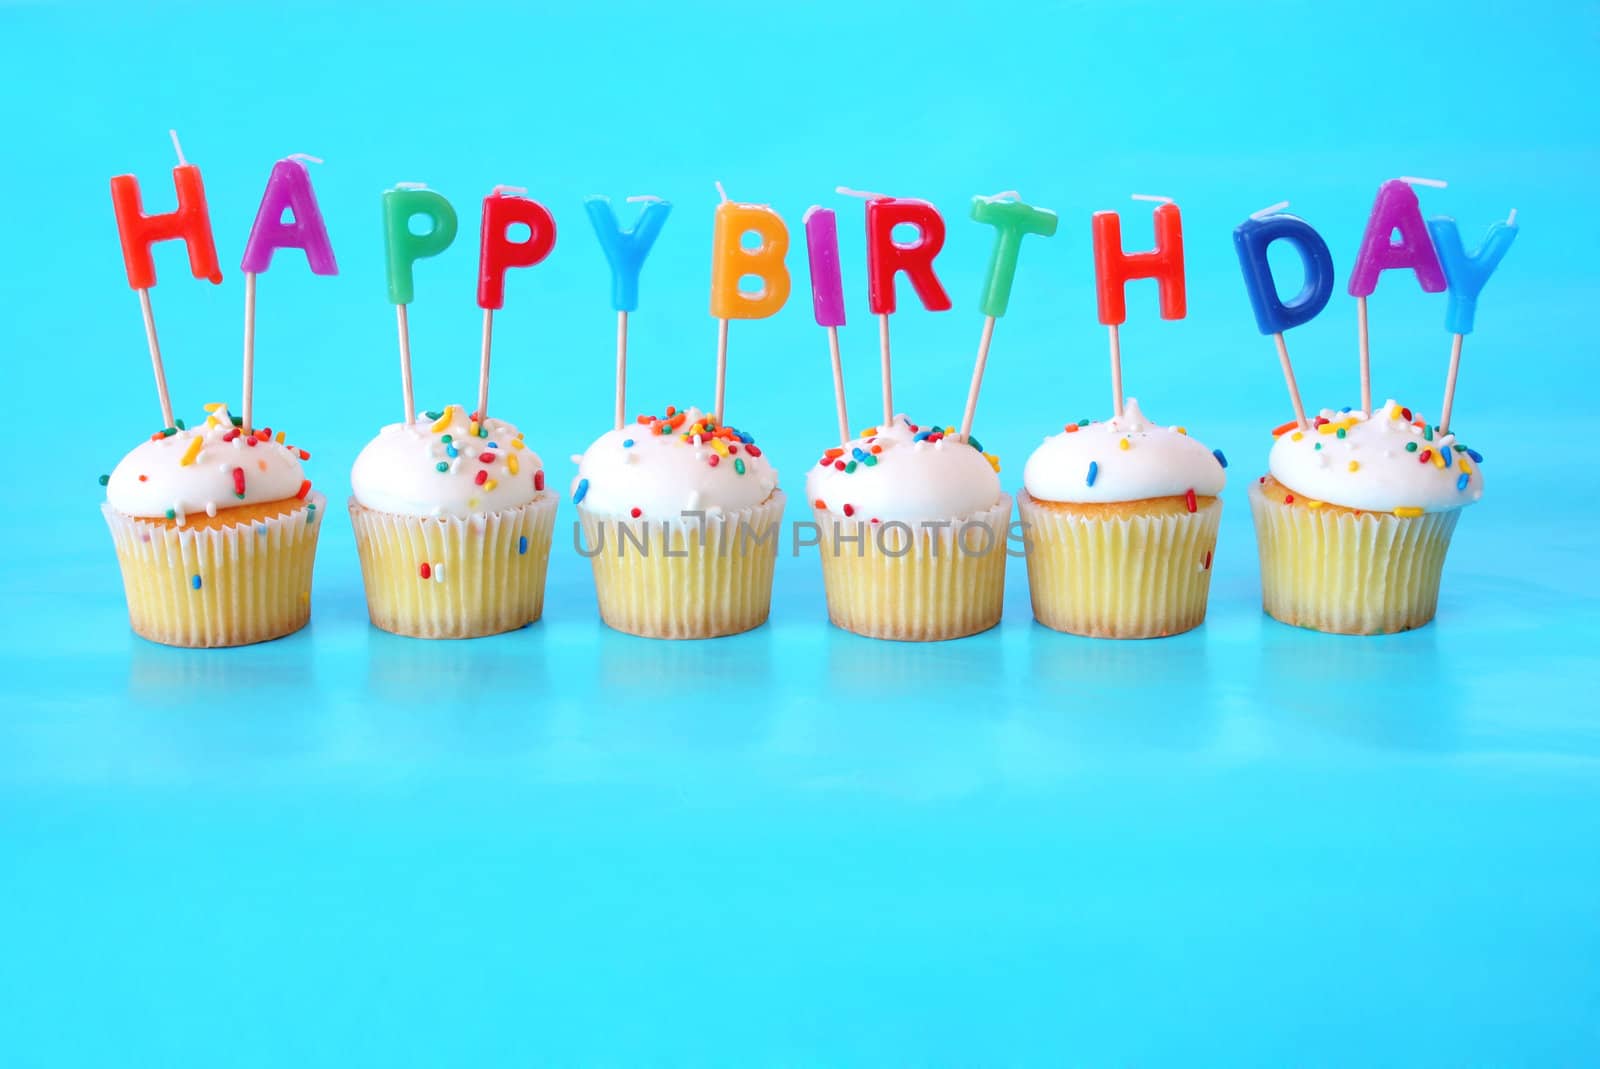 Cupcakes with Happy Birthday Candles on them against a blue background and plenty of room for copy space.